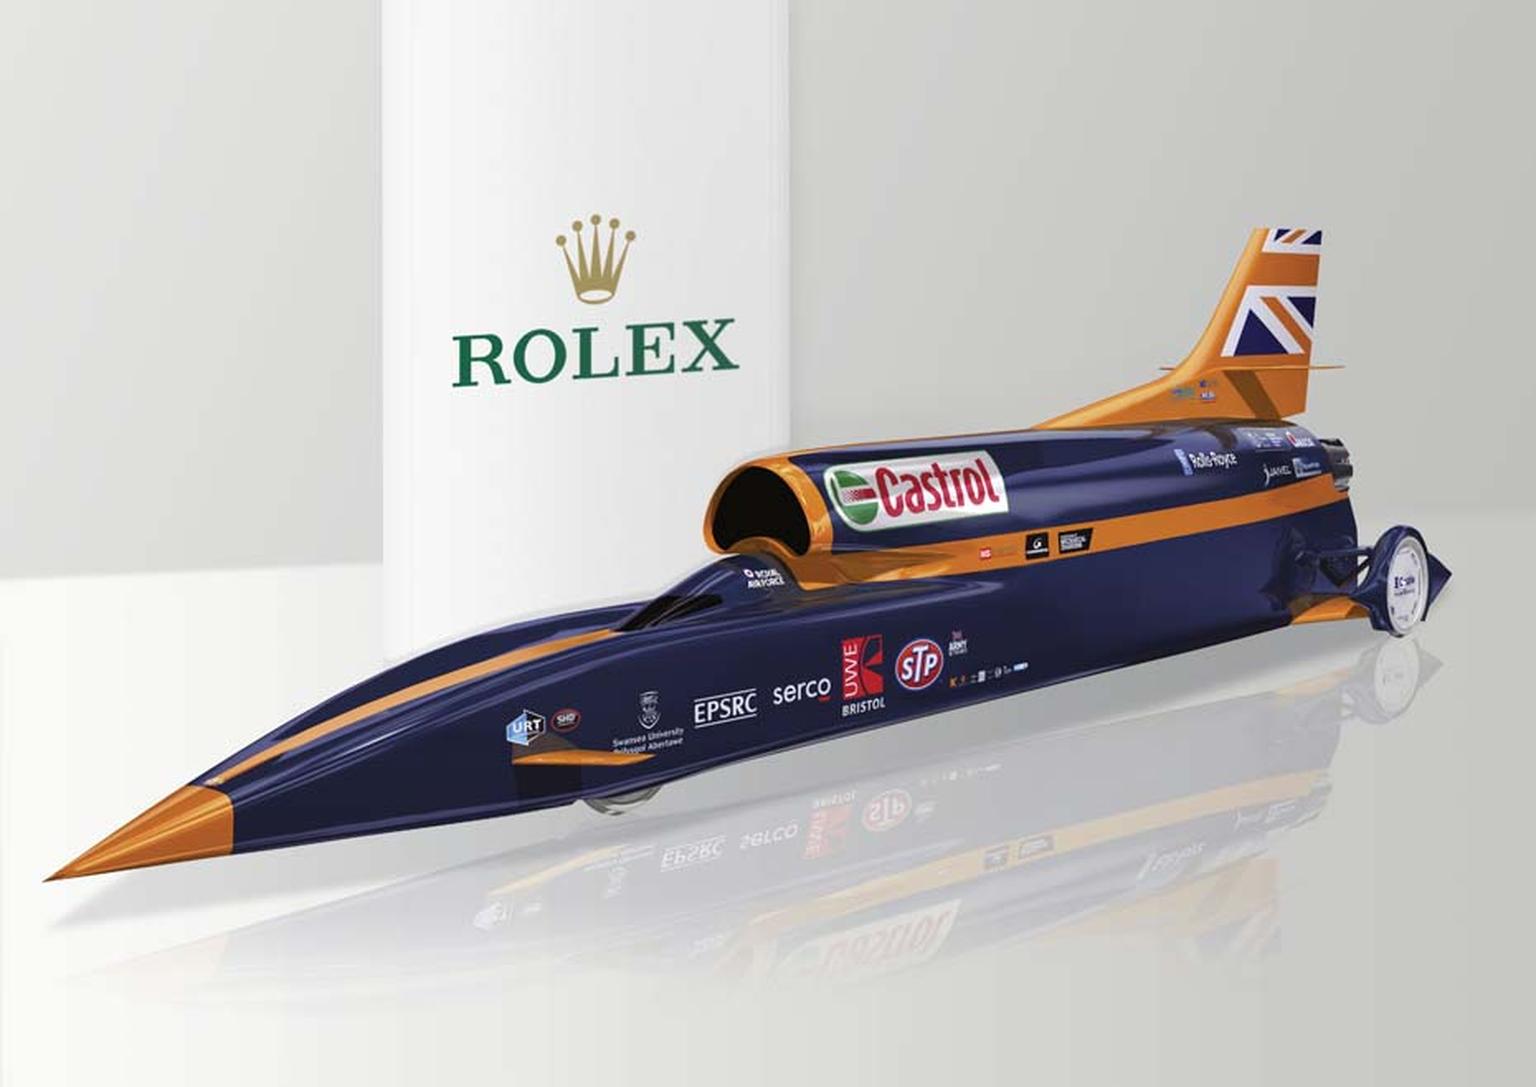 Ahead of a land speed record attempt planned for 2016, the Bloodhound SSC supersonic car travels at speeds of 130,000bhp generated by jet and rocket engines.